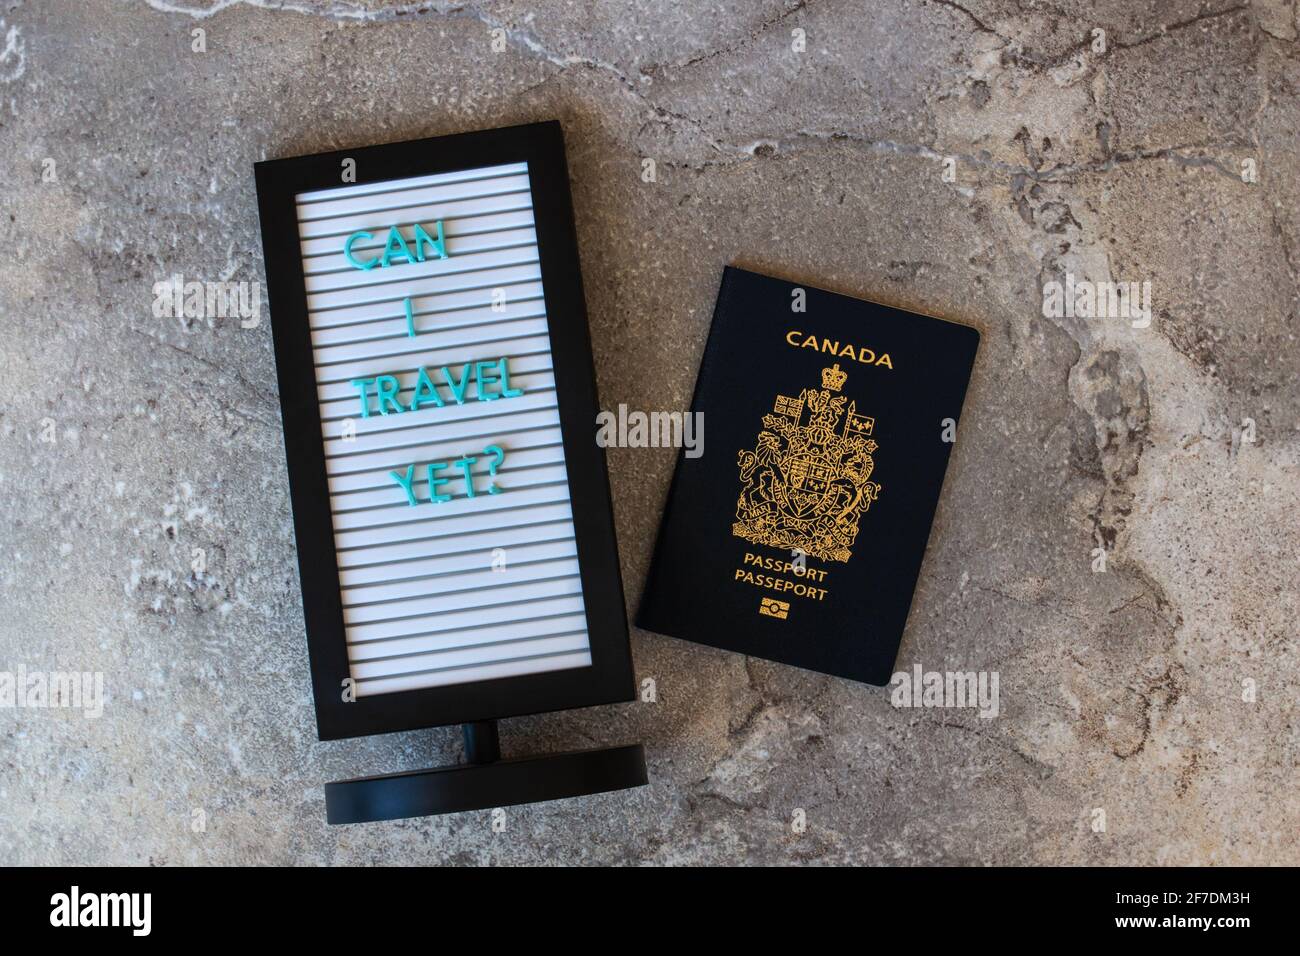 Message board, 'can I travel yet' and Canadian passport on a marble backdrop, Canada, Ontario. Stock Photo